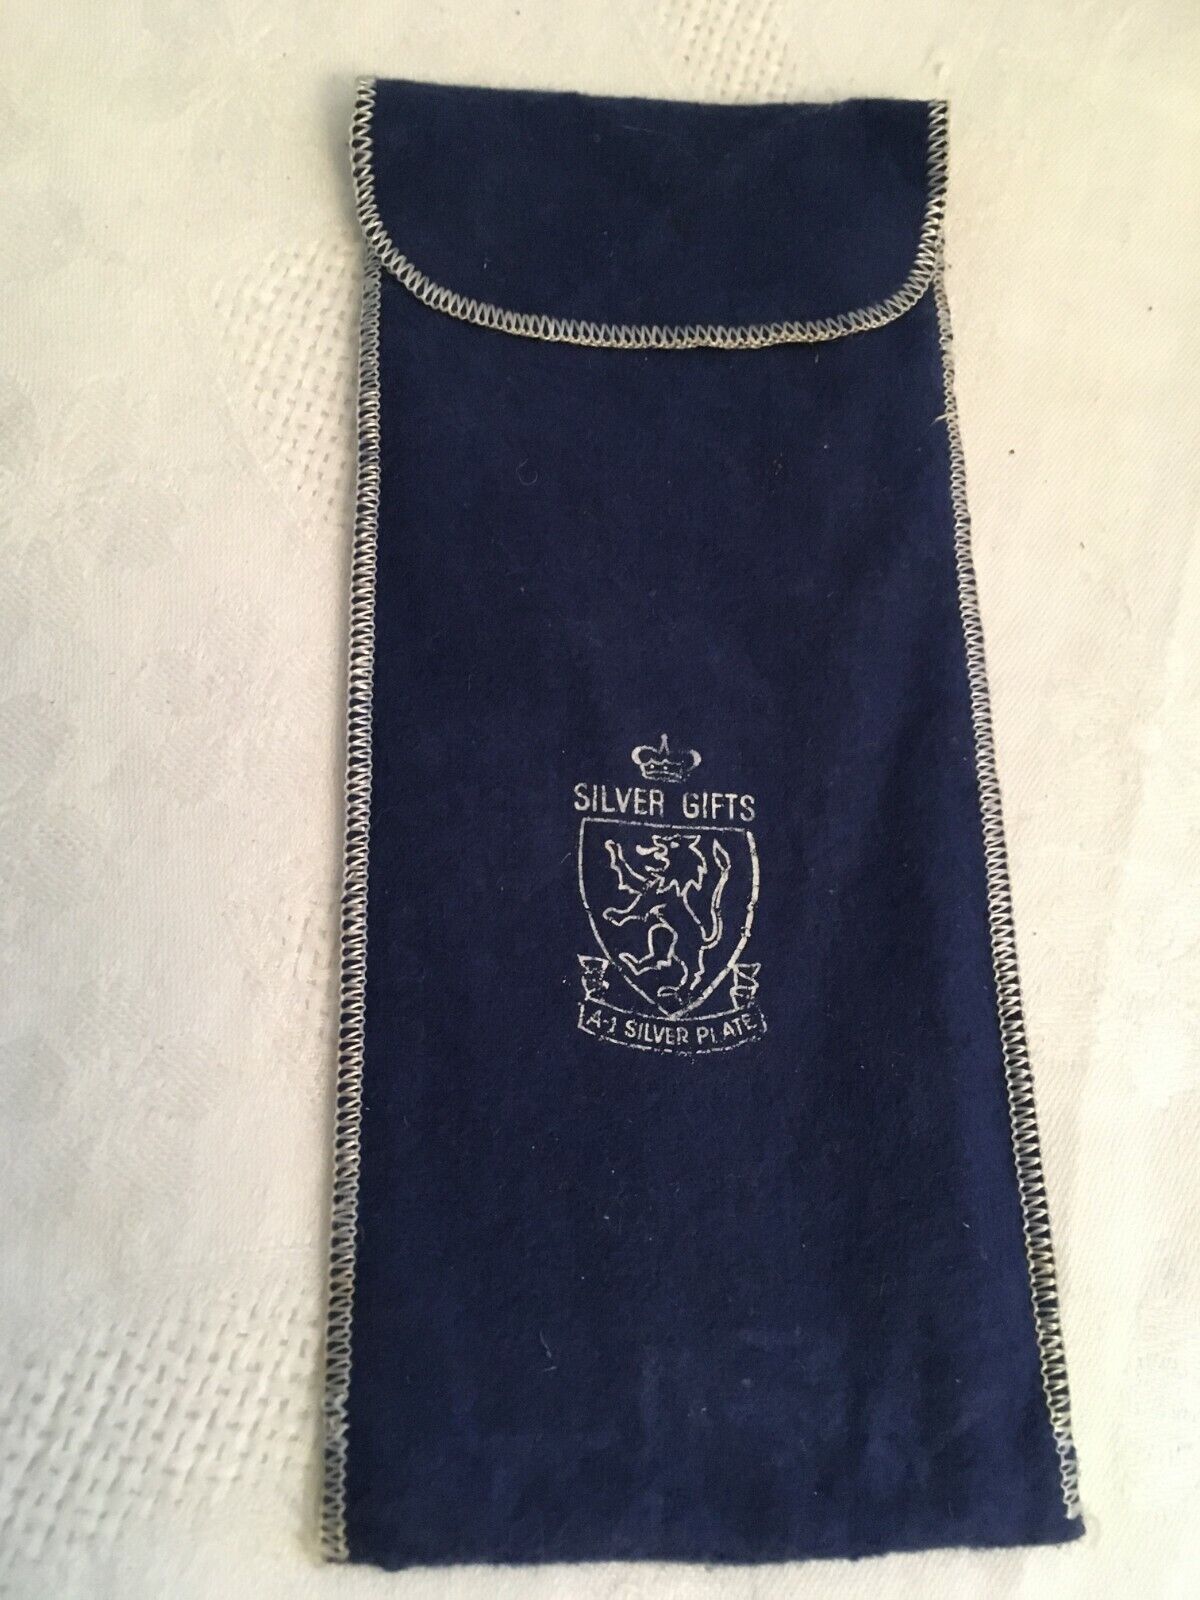 Vintage SILVER GIFTS A-1 SILVER PLATE Blue Storage Bag 9" Long